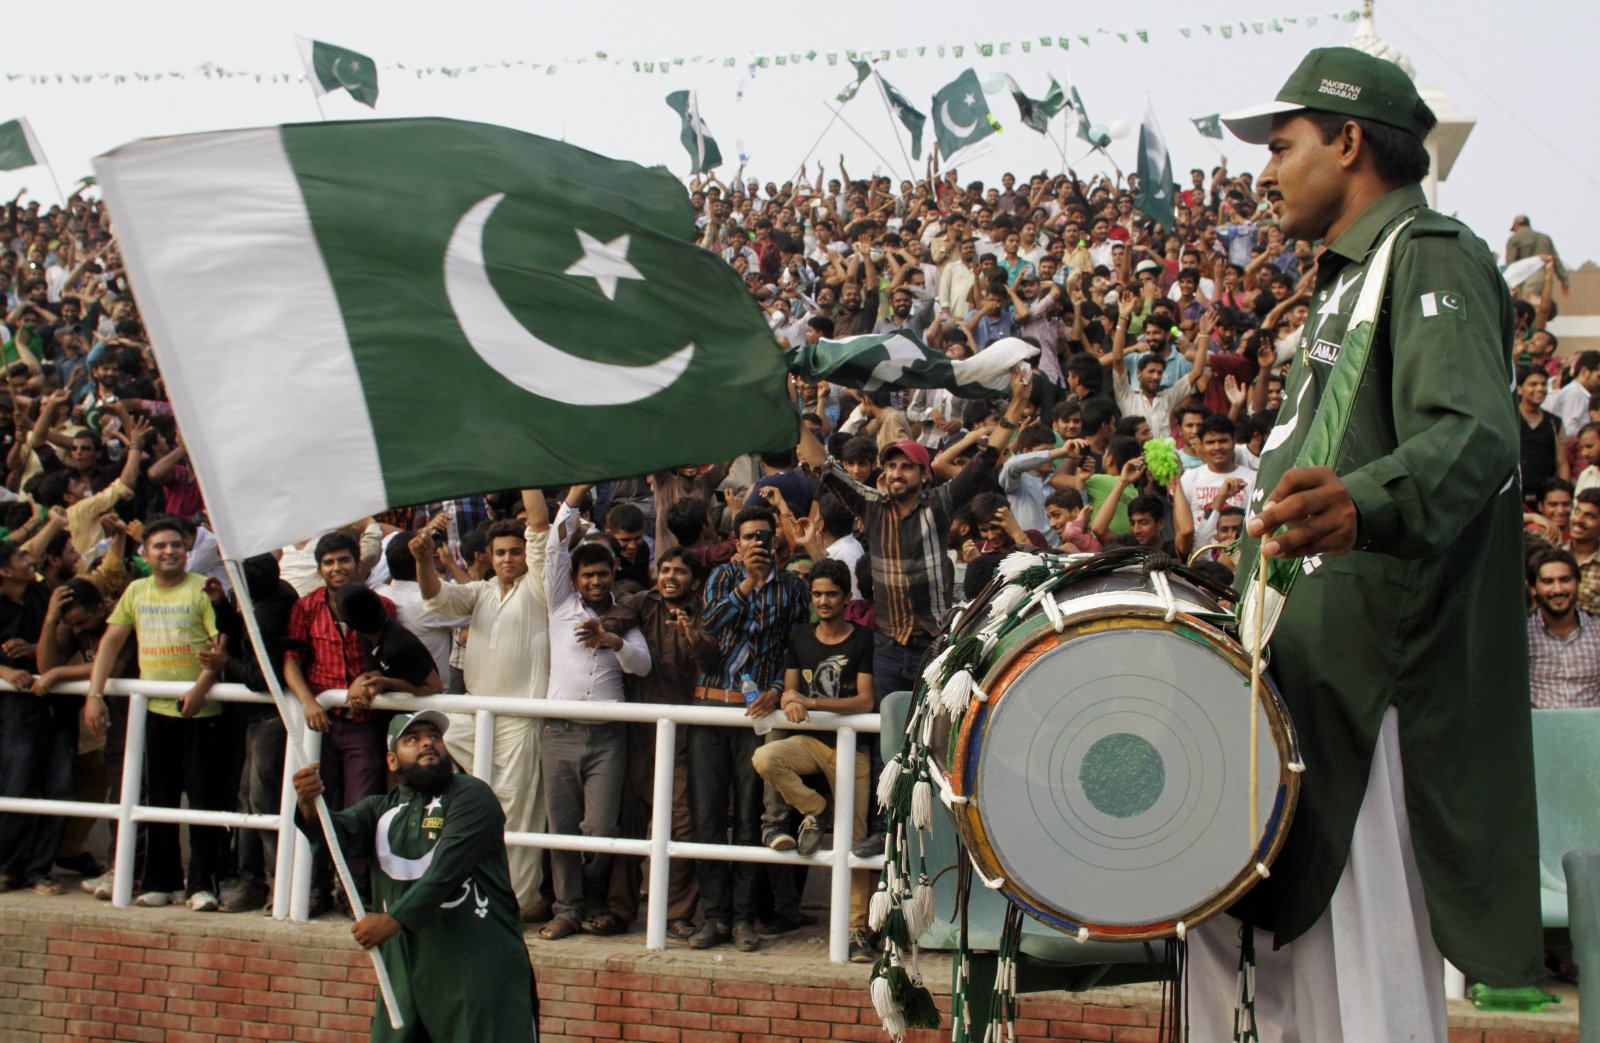 Pakistanis Take Part In Ceremony Celebrating The Independence Day Of Pakistan At Wagah